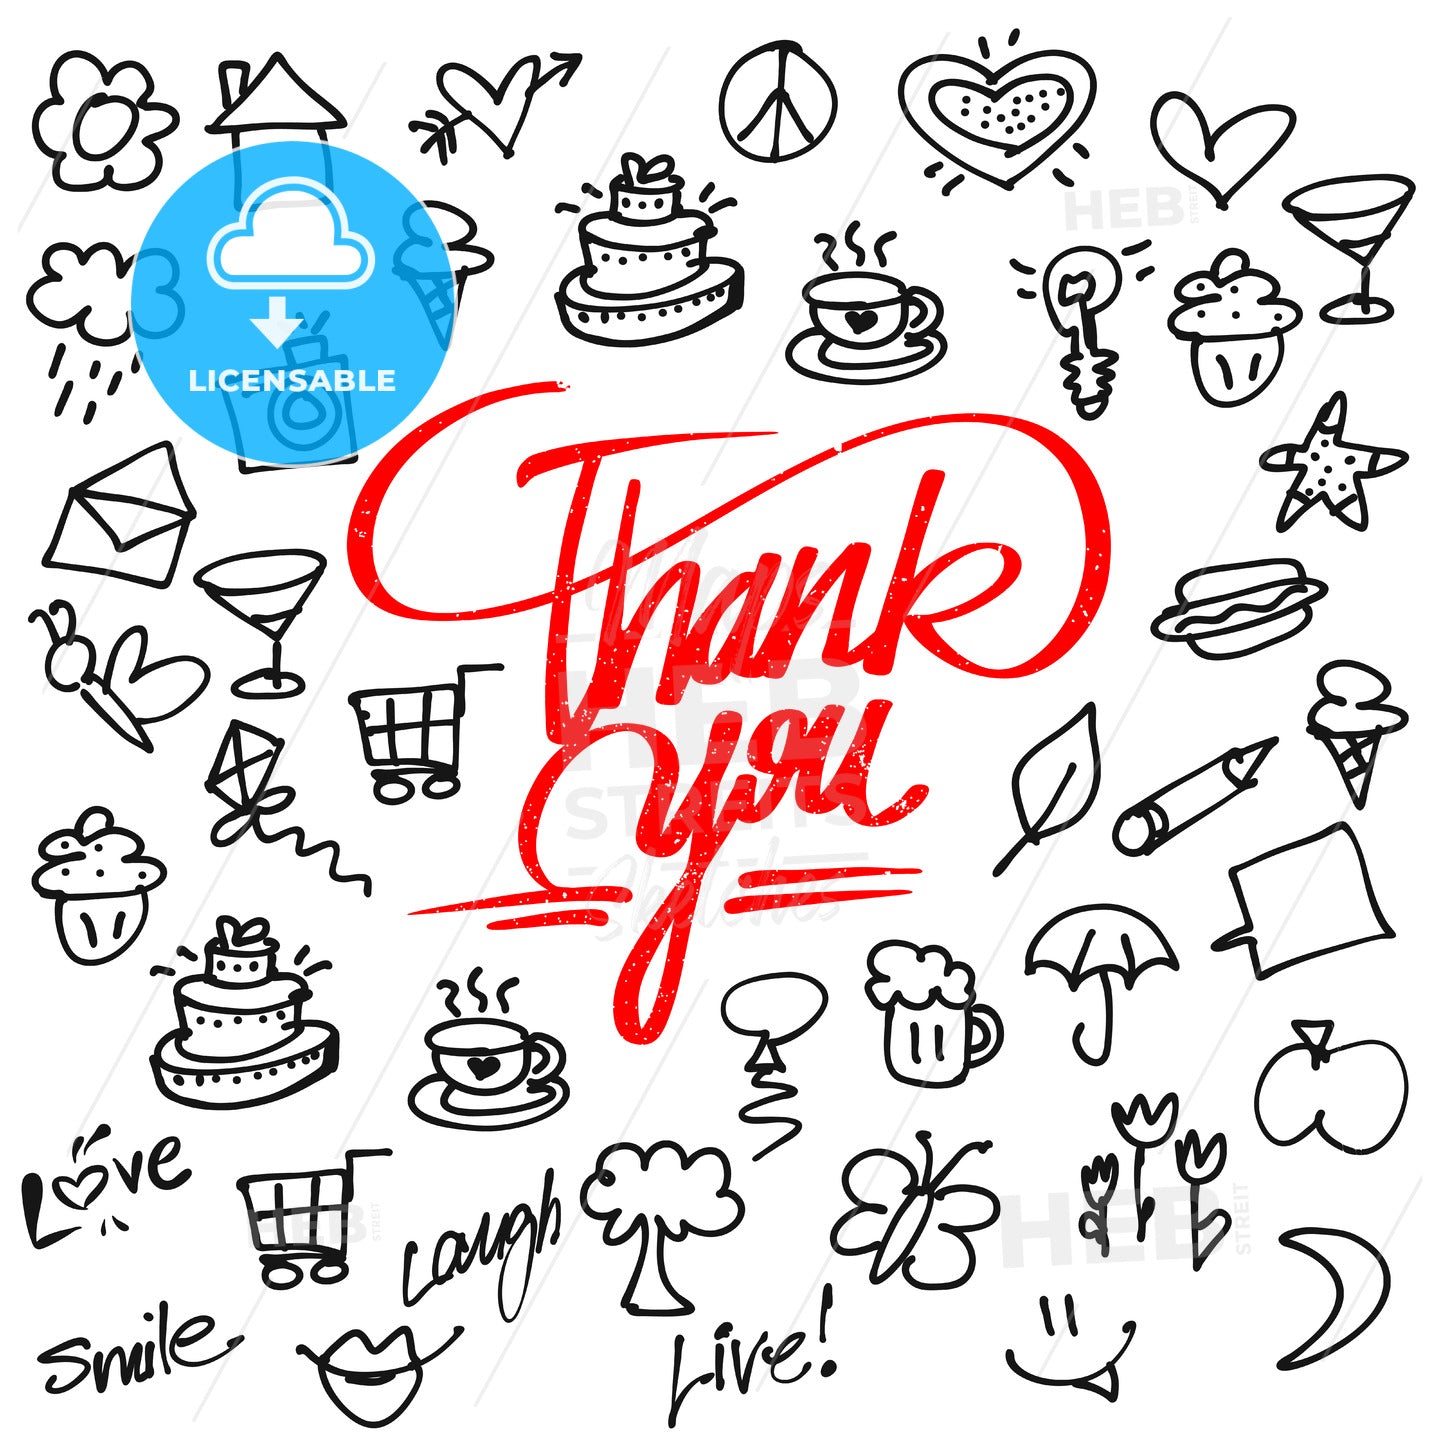 Thank you letter Typo and Icons – instant download